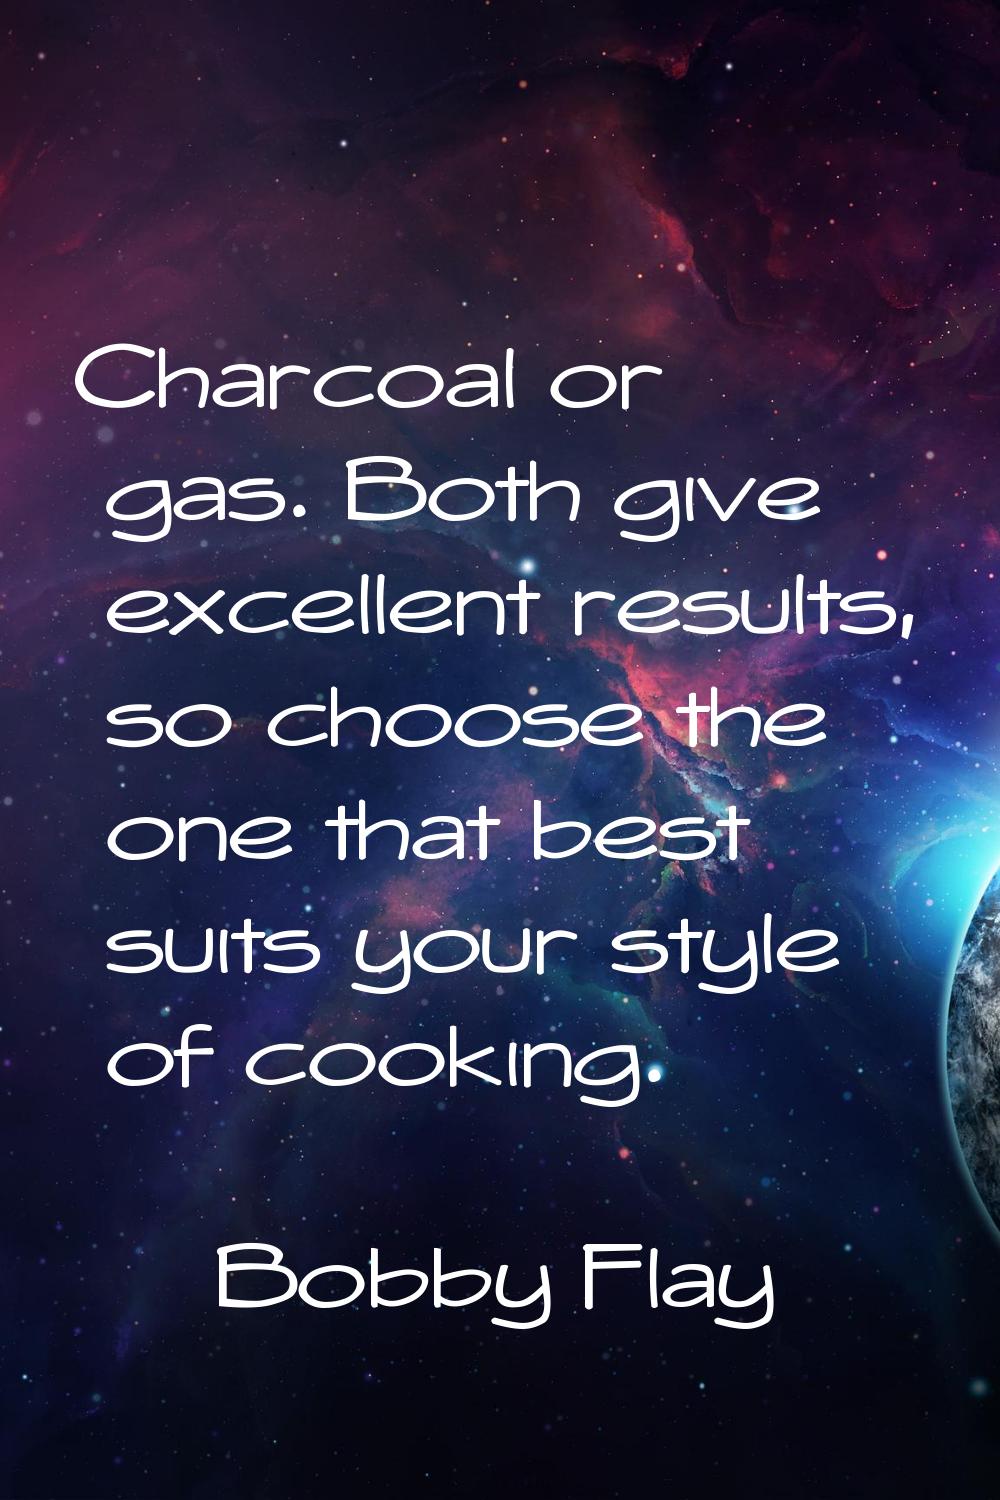 Charcoal or gas. Both give excellent results, so choose the one that best suits your style of cooki